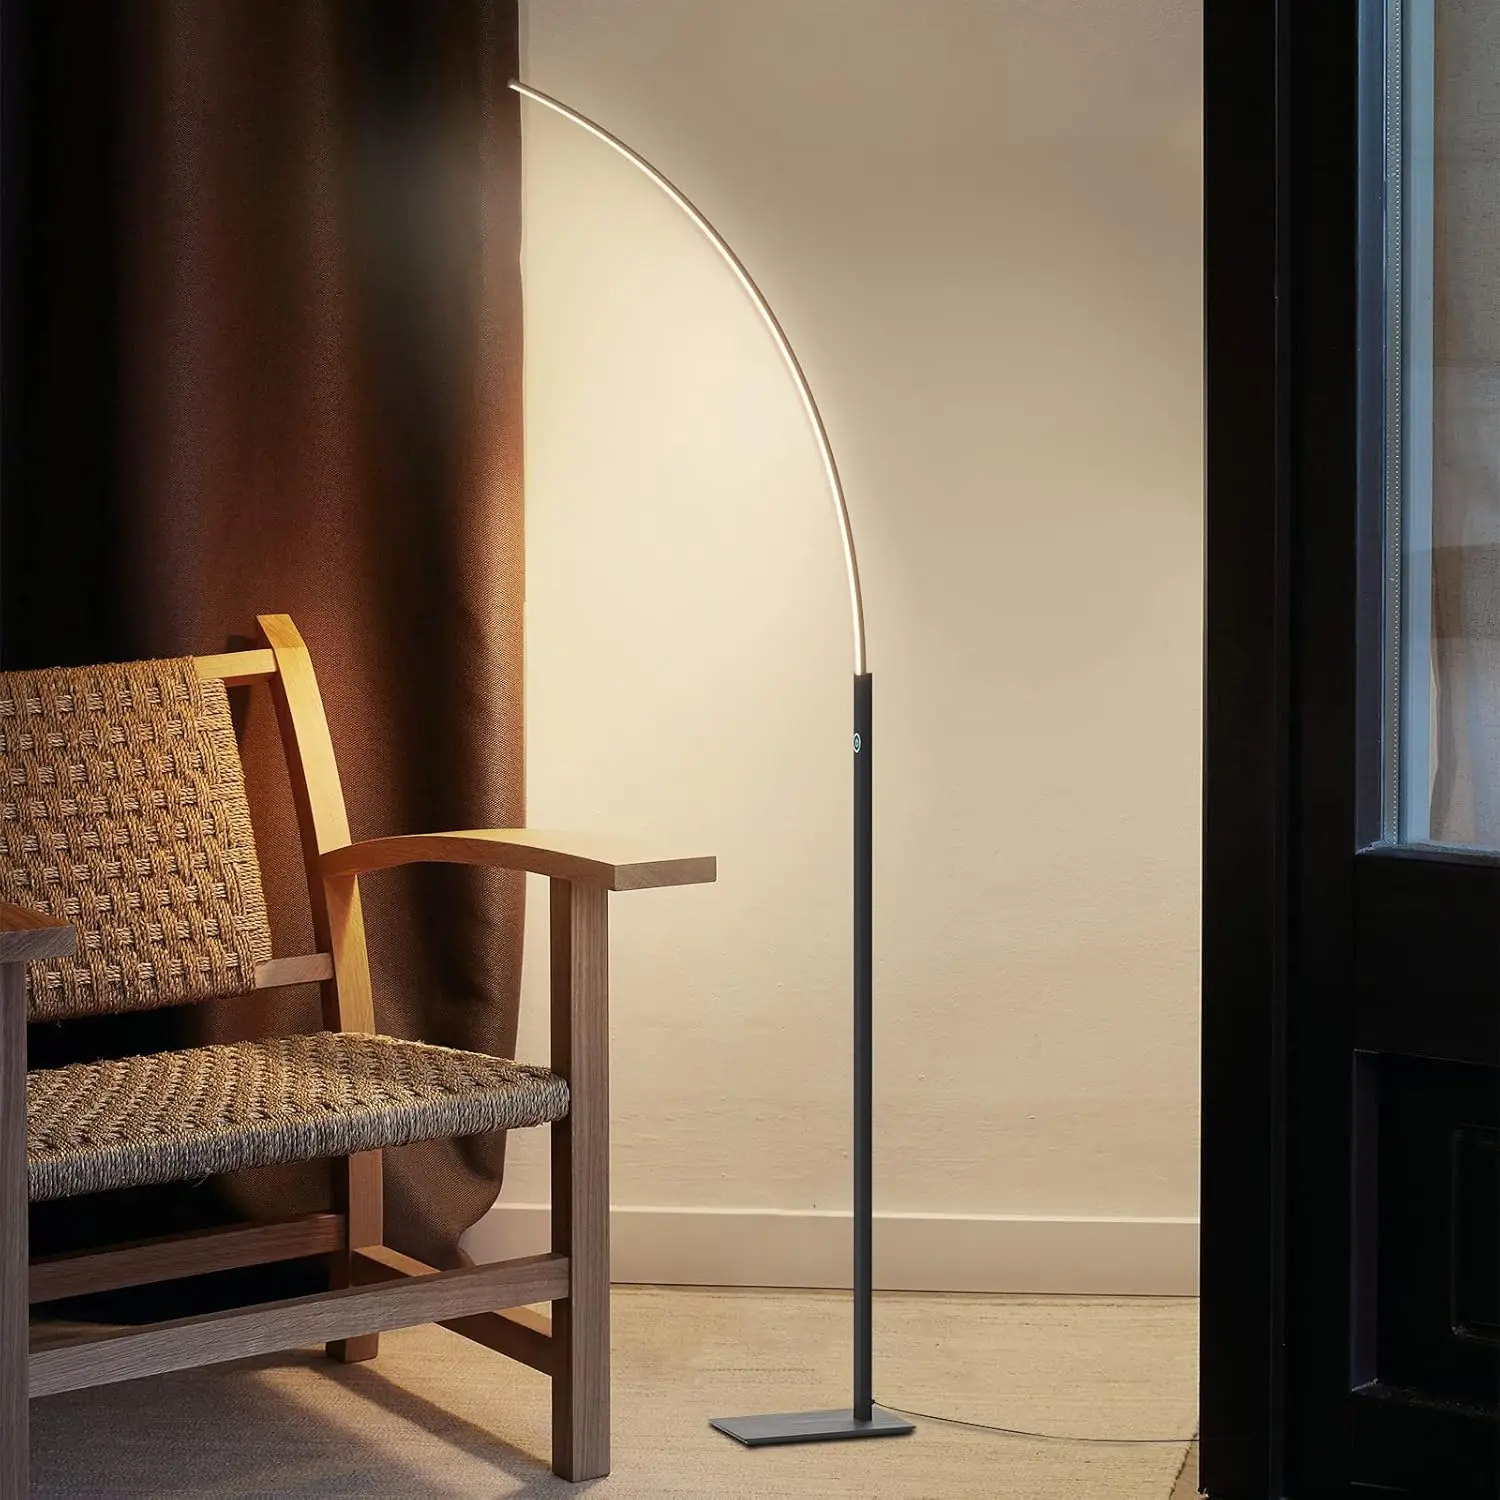 

Arc Corner Floor Lamp - 3000K Warm White & 3 Brightness Presets - Curved LED Accent Lamp with Touch Switch - 63"